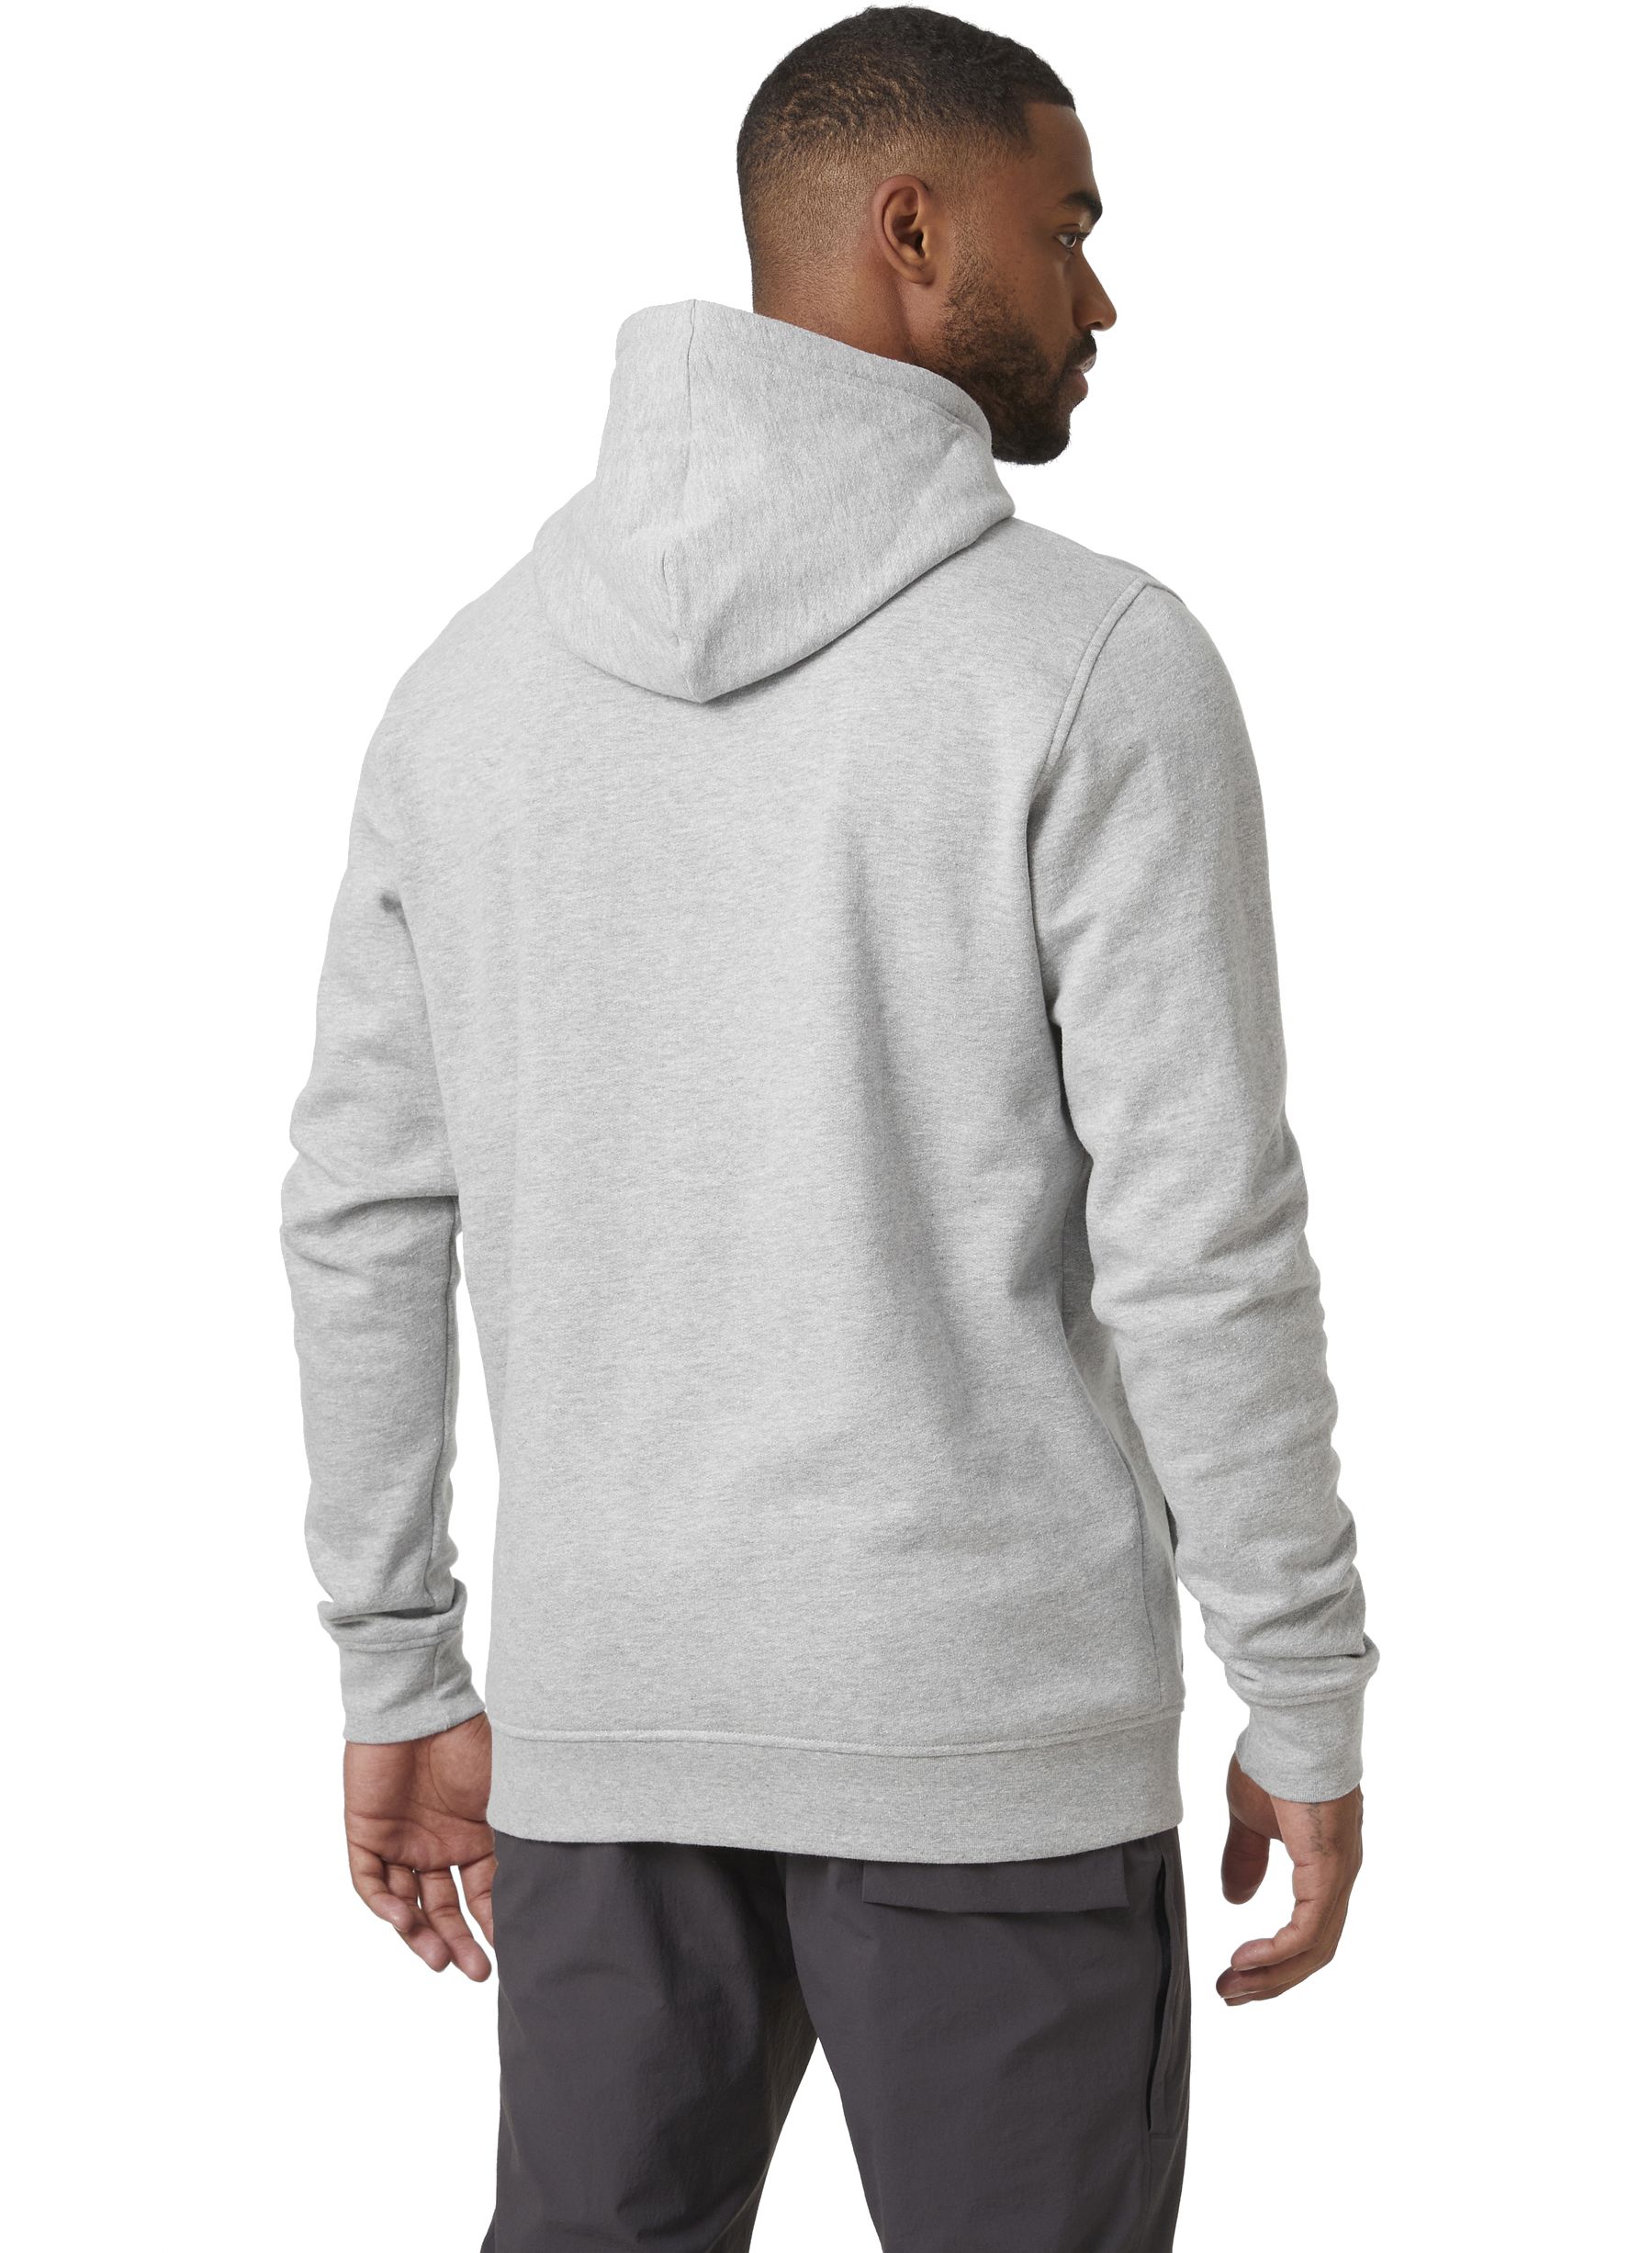 HELLY HANSEN, NORD GRAPHIC PULL OVER HOODIE M